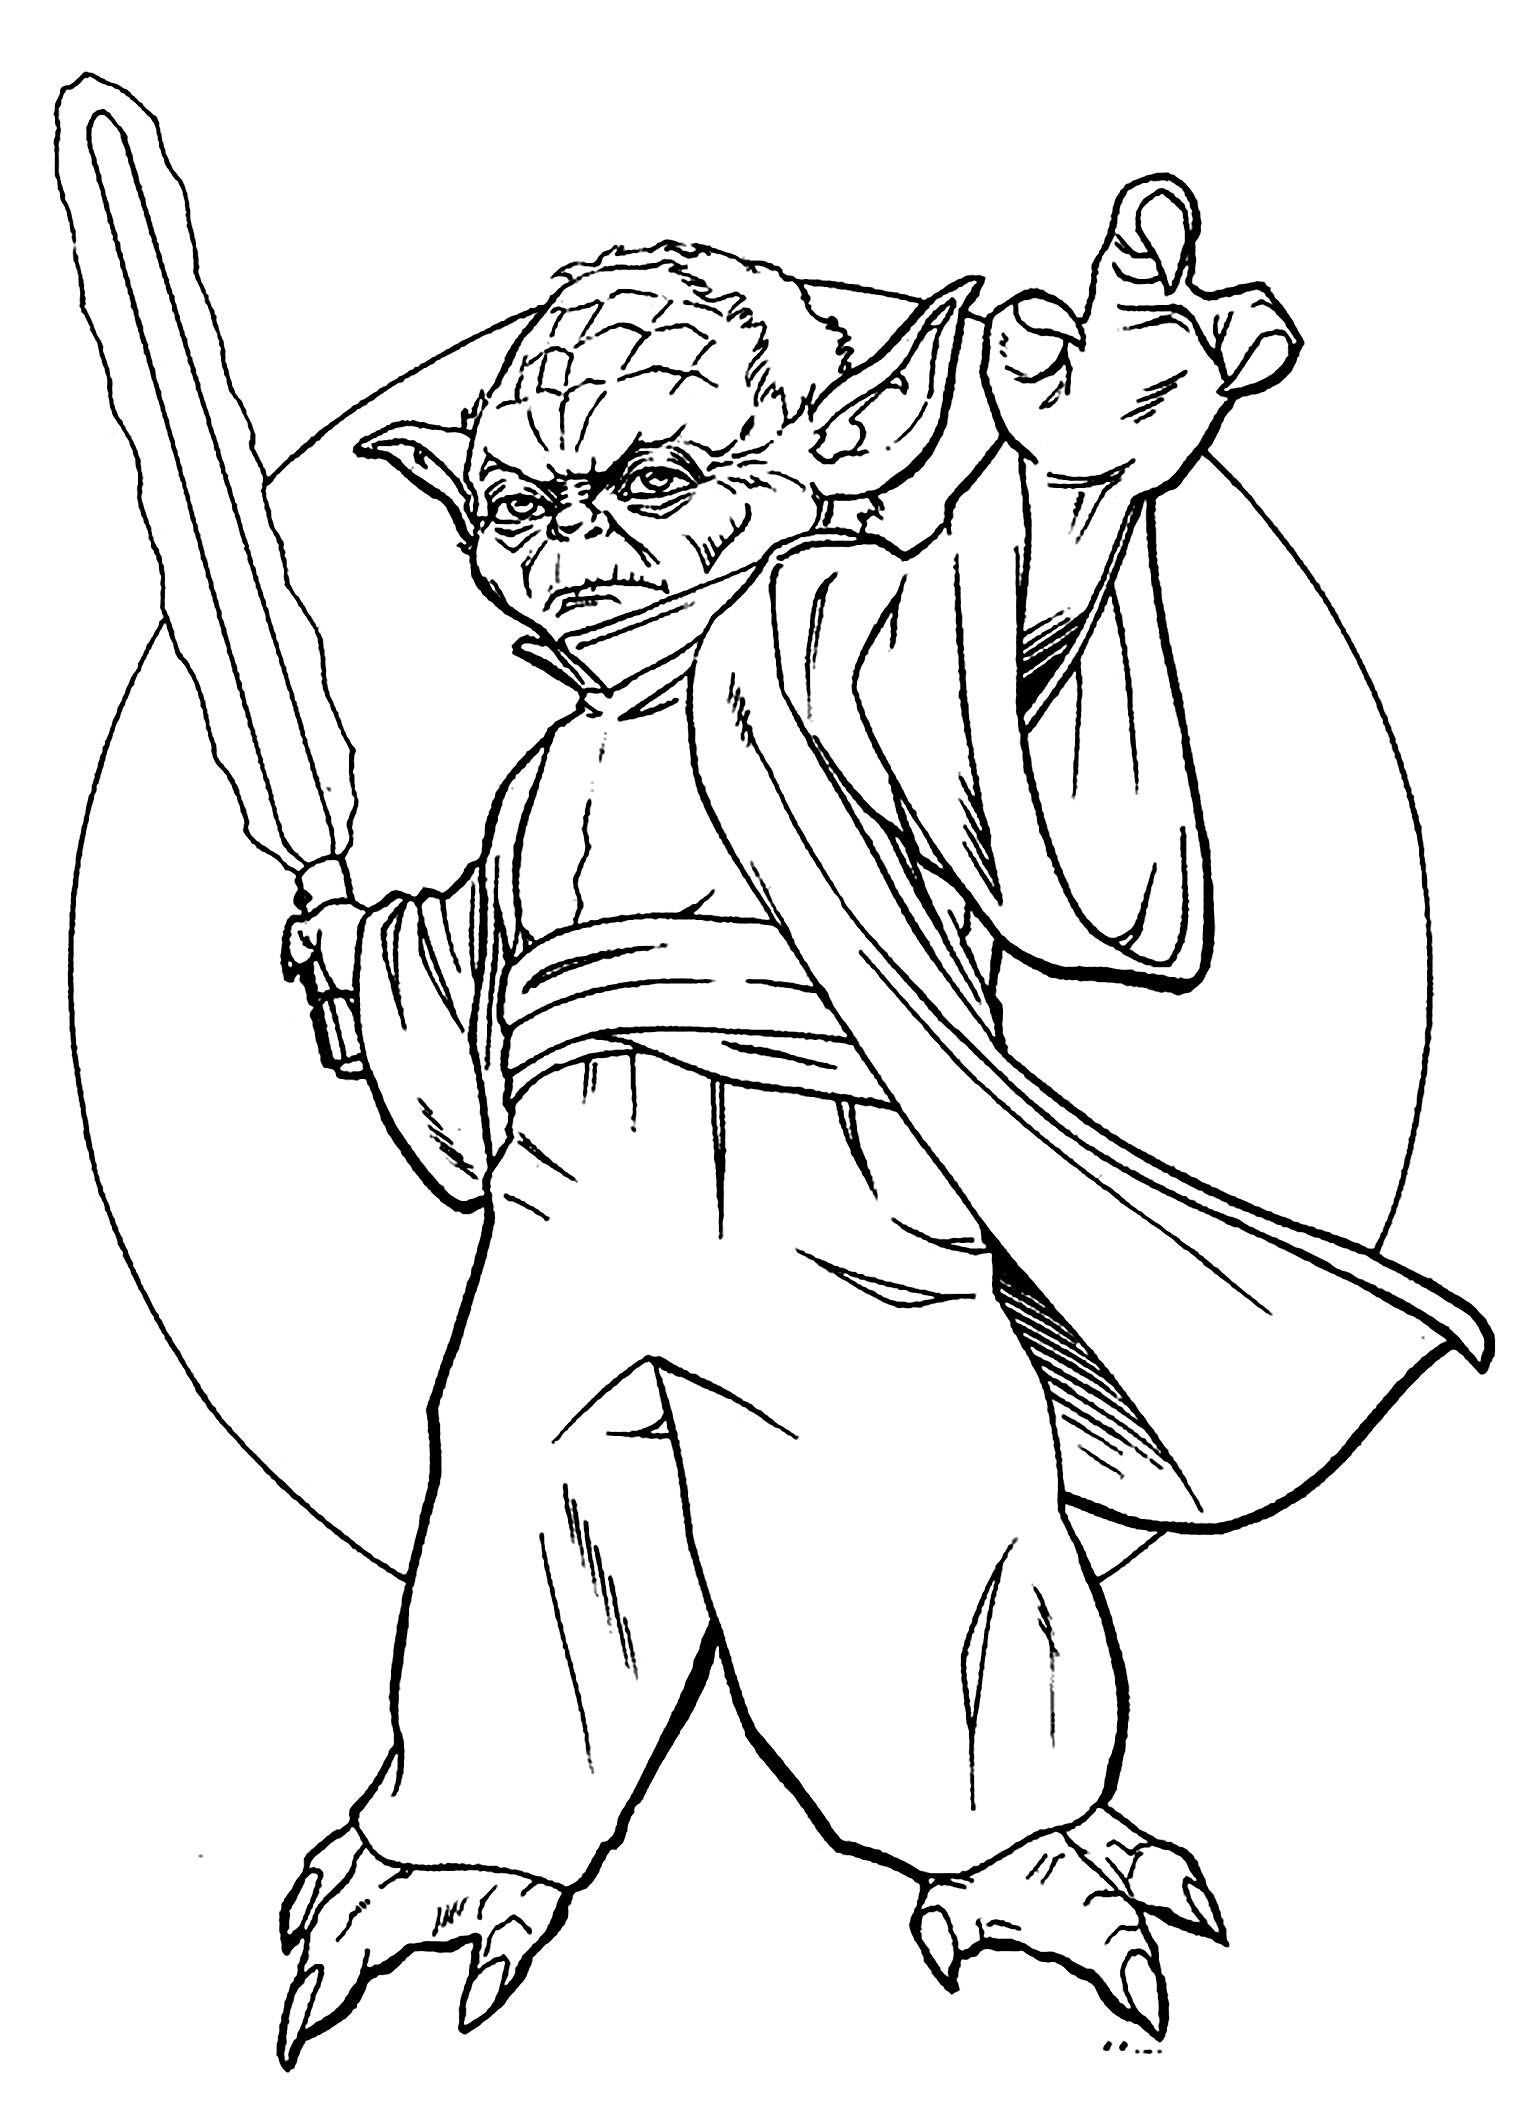 Jedi Master Yoda and his lightsaber